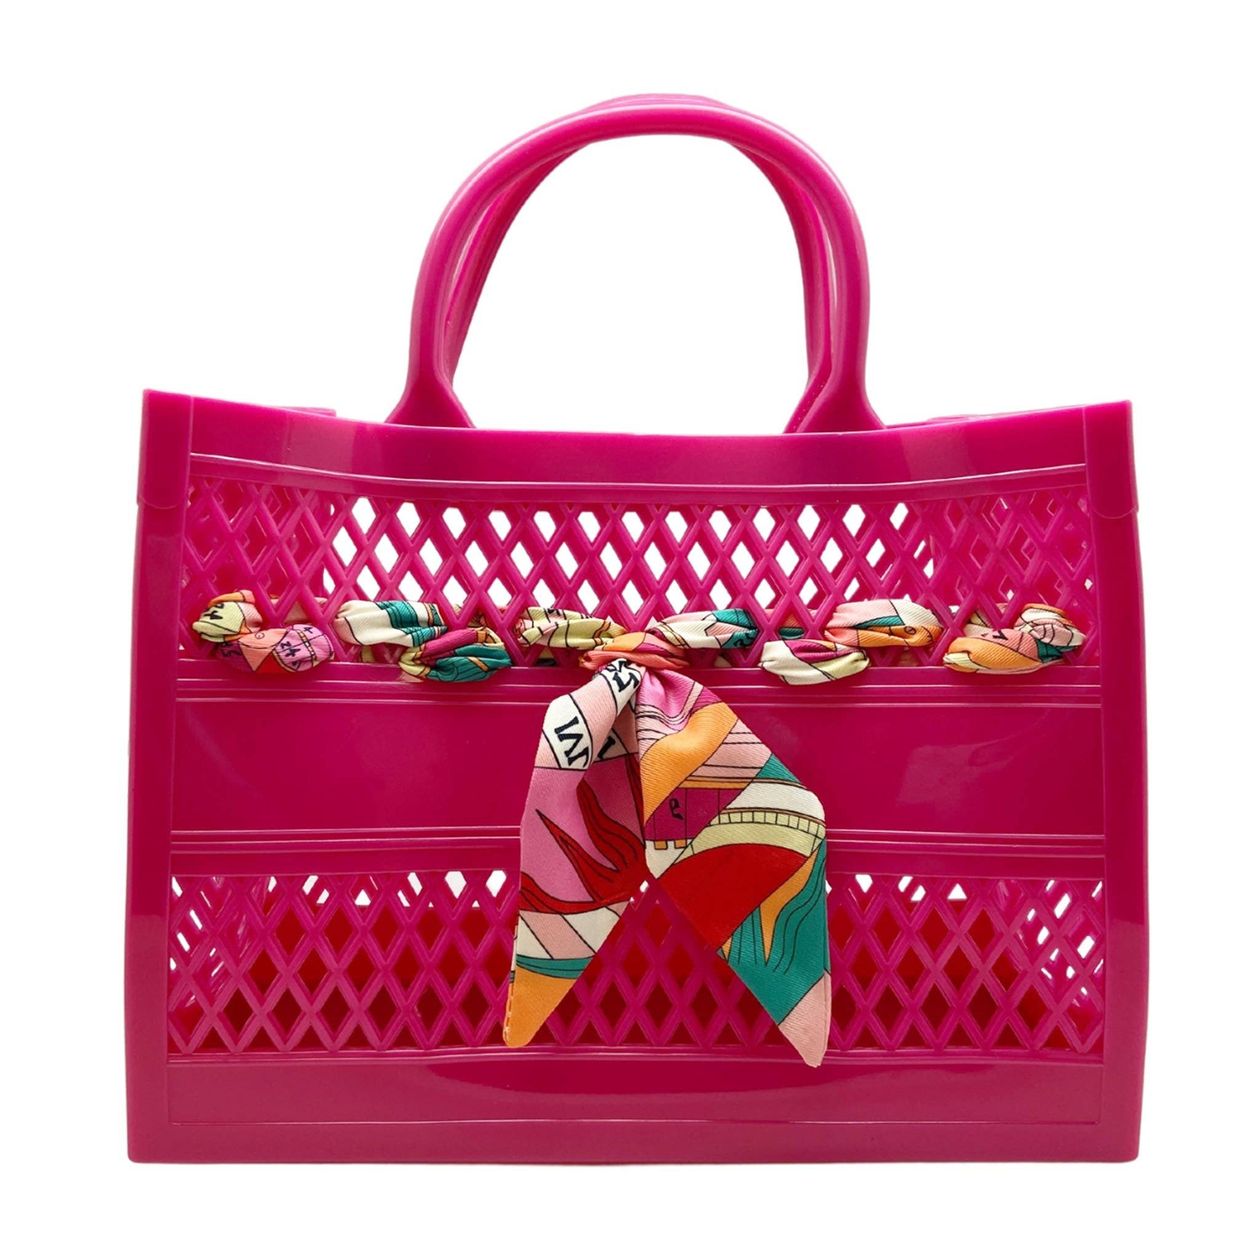 The Soleil Cutout Jelly Tote - Hot Pink